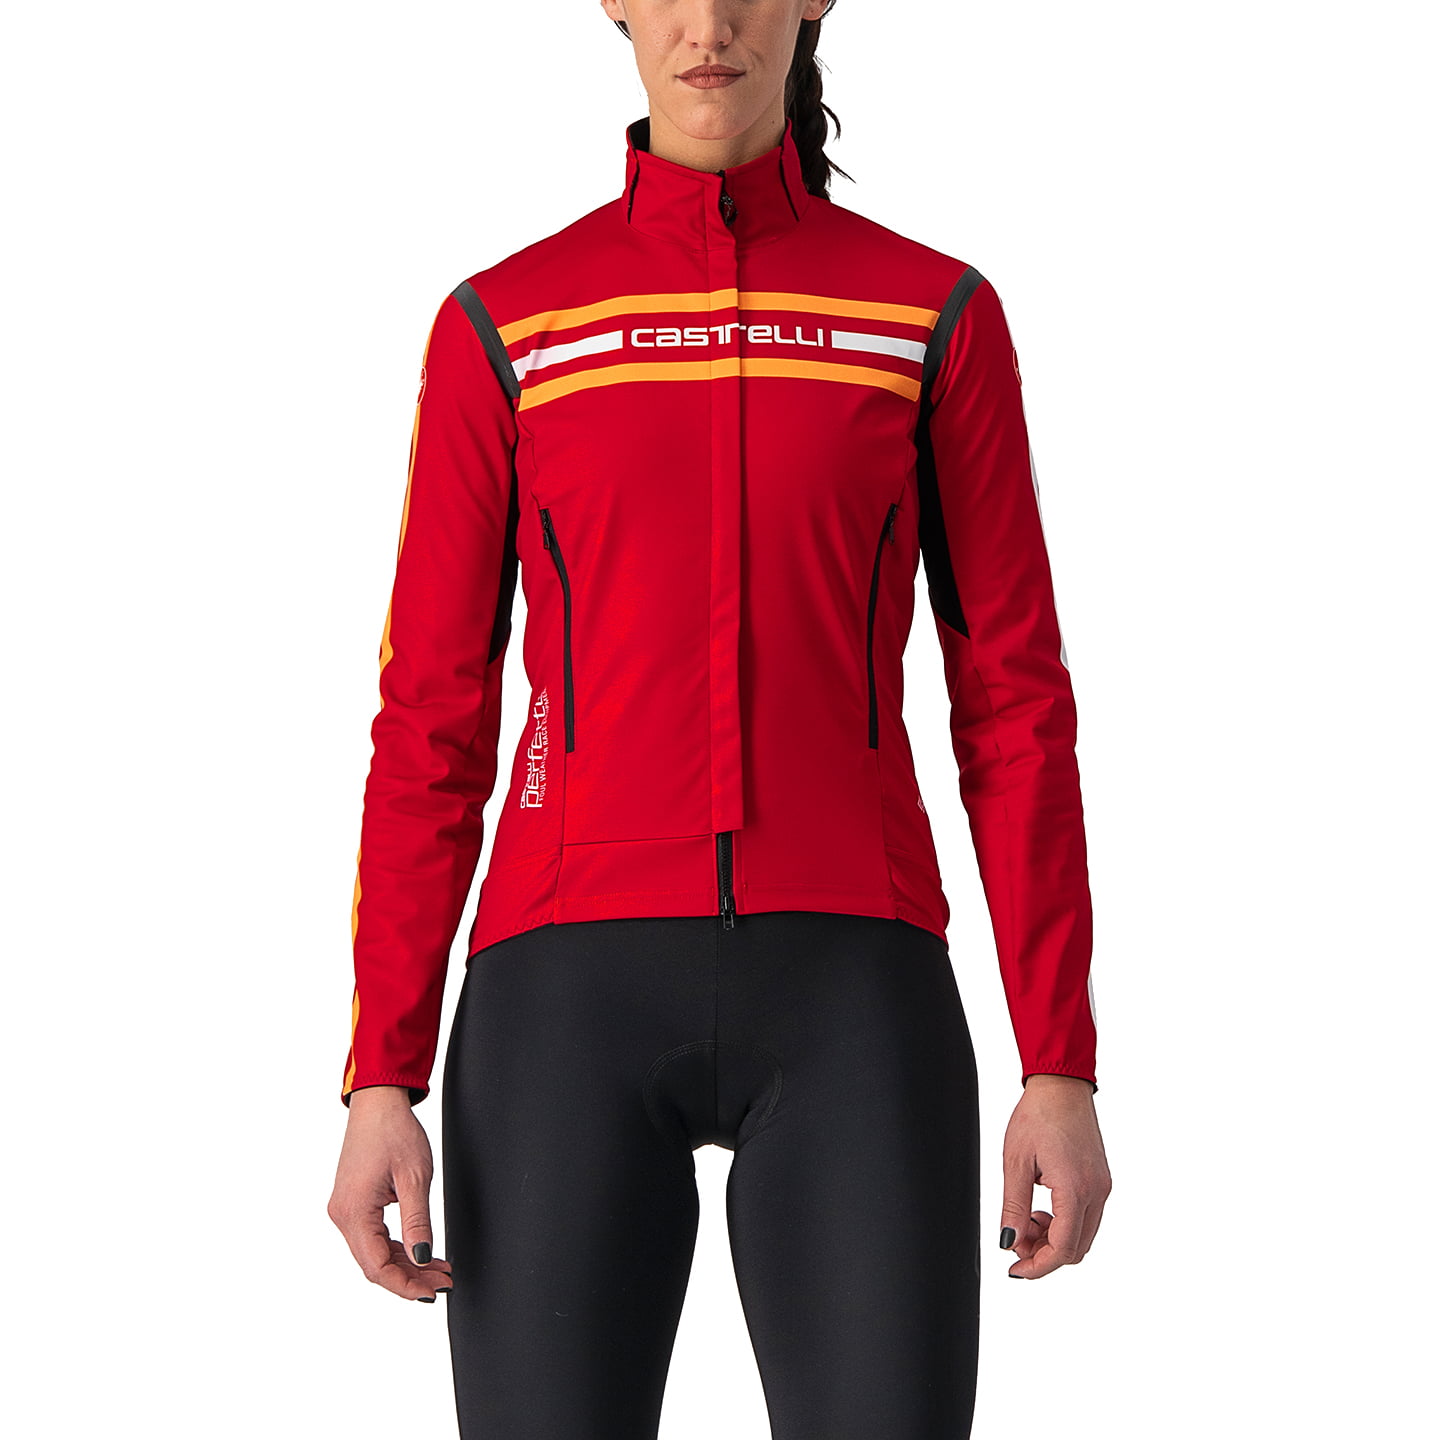 CASTELLI Perfetto RoS Unlimited Edt. Women’s Light Jacket Light Jacket, size S, Cycle jacket, Cycle clothing